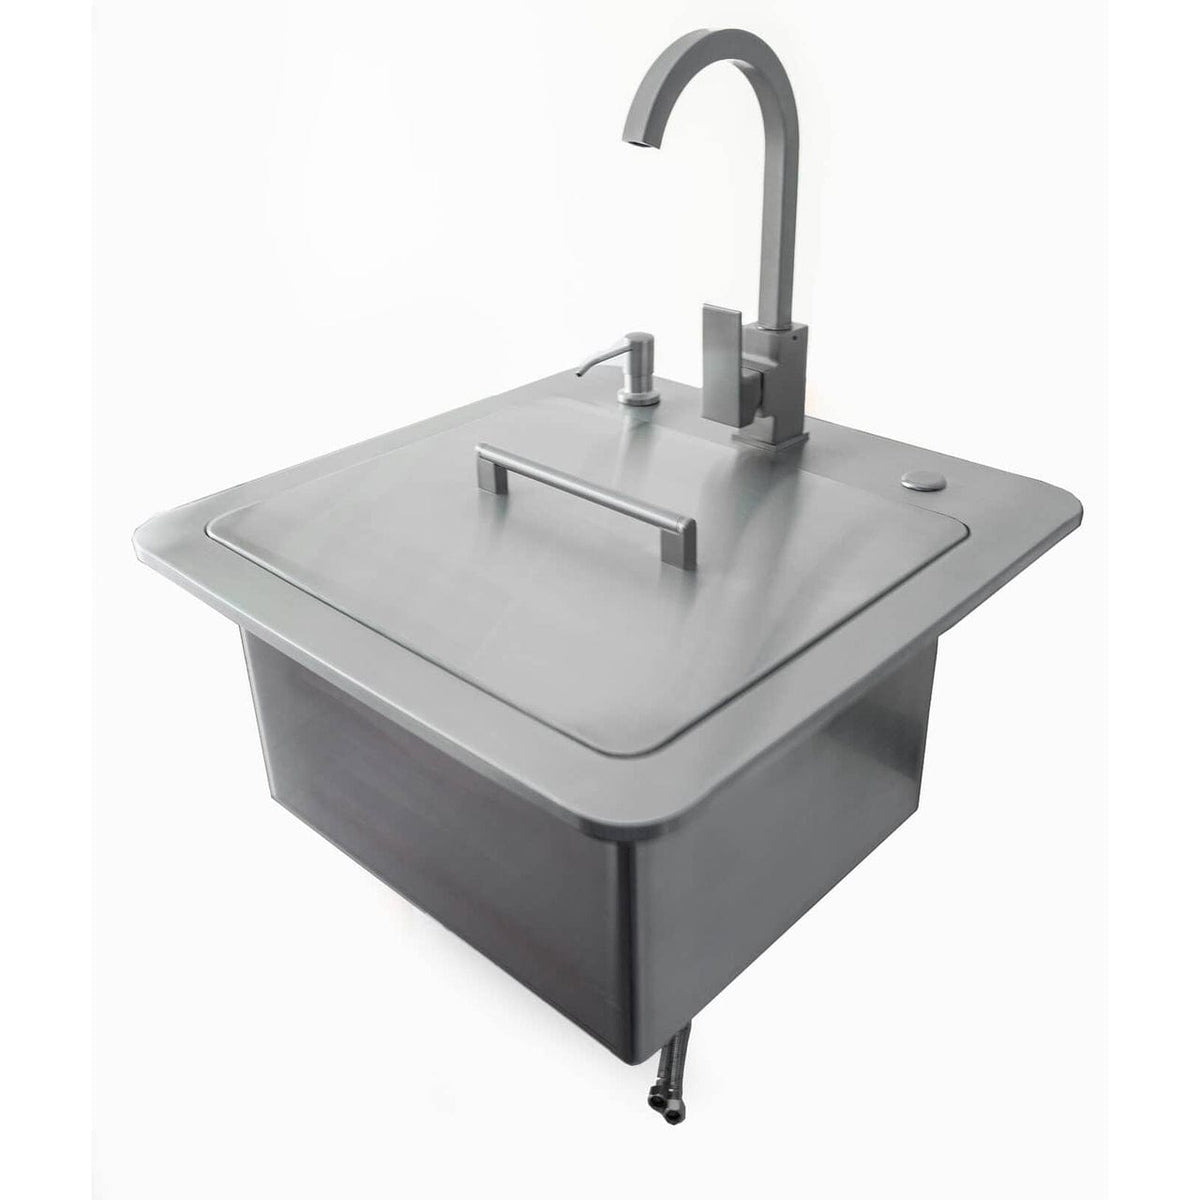 Coyote Accessories Coyote Coyote 21&quot; Sink With Faucet, Drain, Soap Dispenser / C1SINKF21